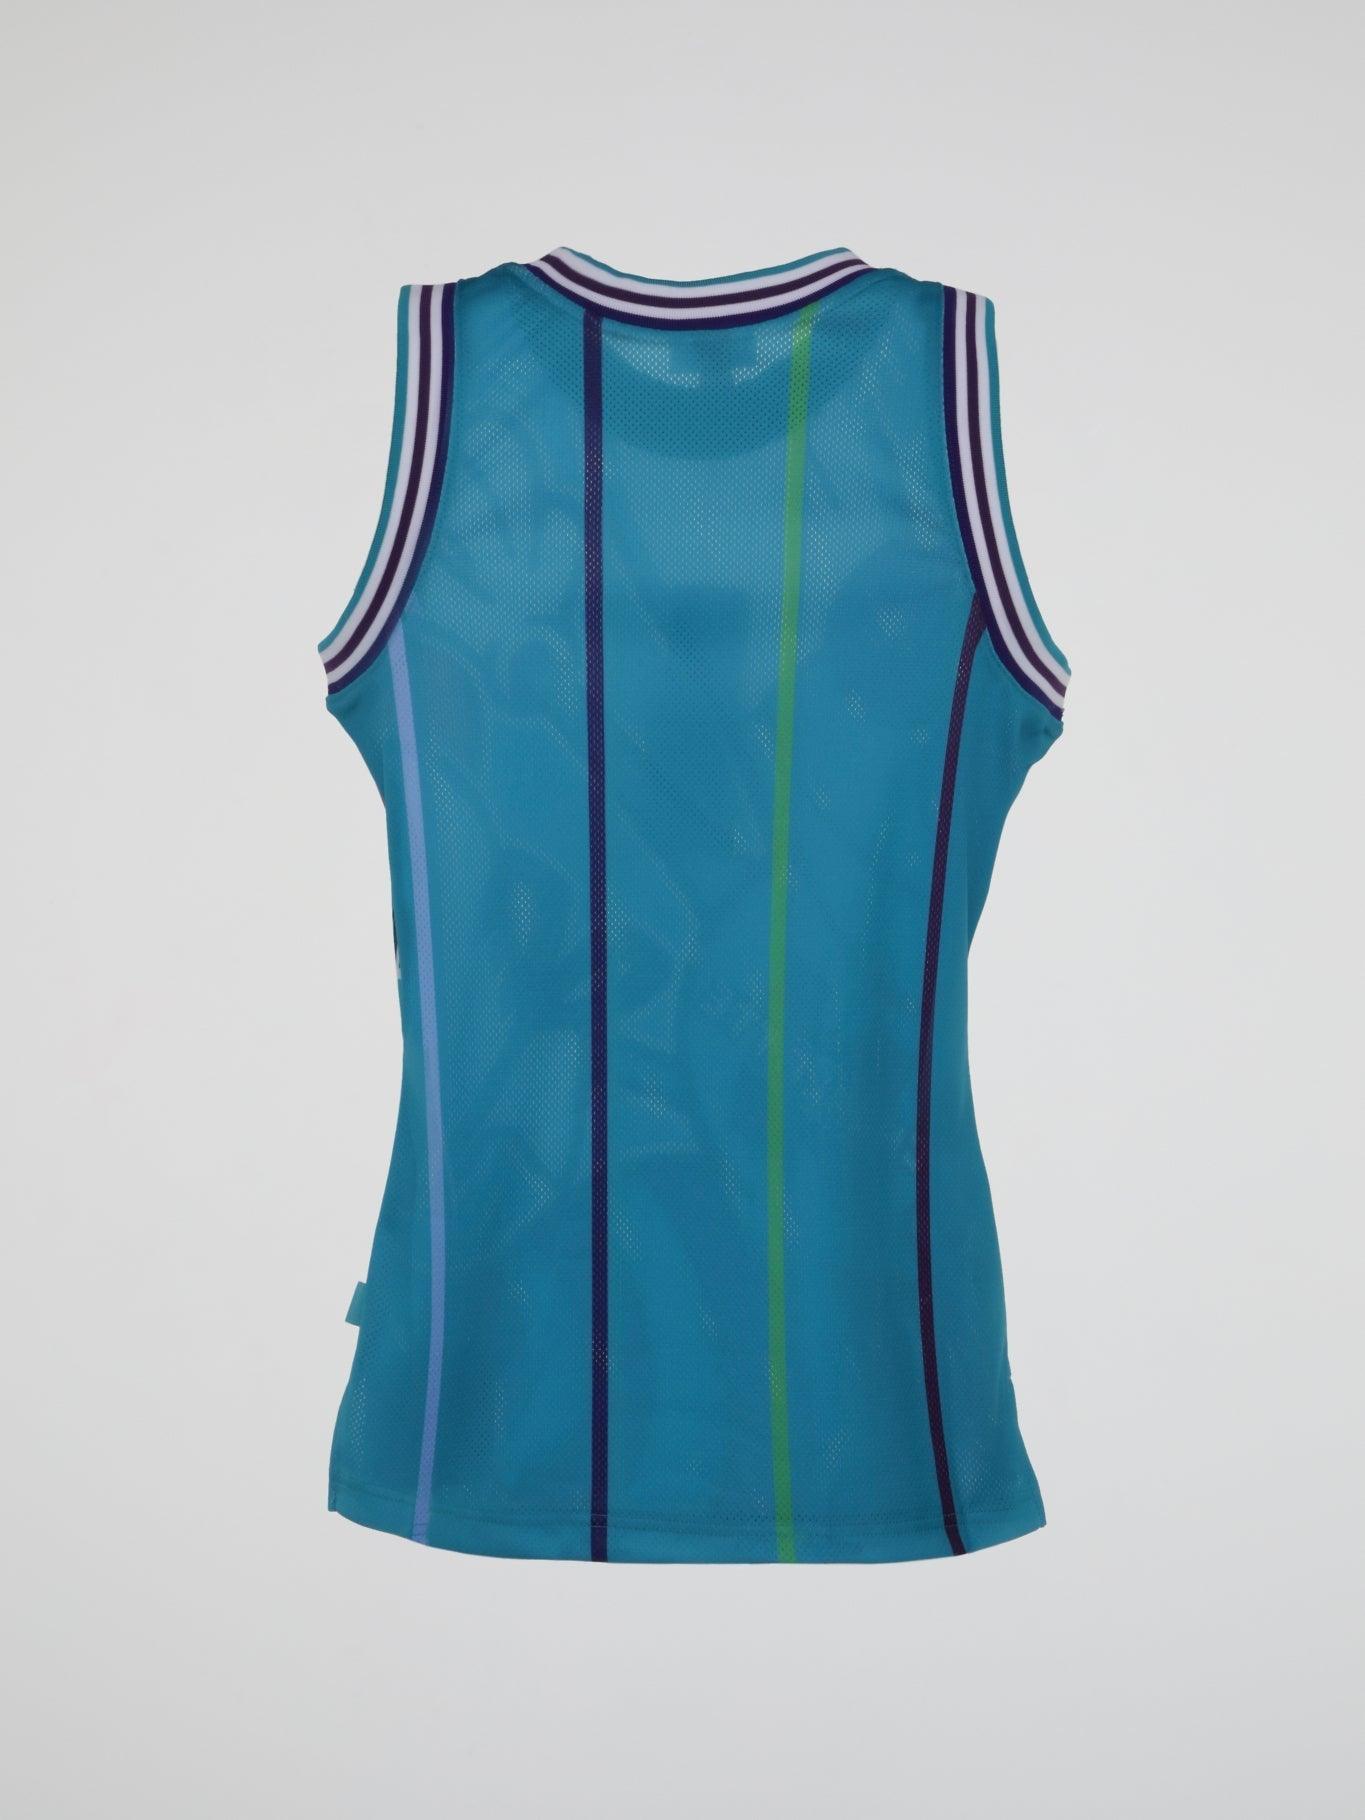 Charlotte Hornets Blown Out Fashion Jersey - B-Hype Society